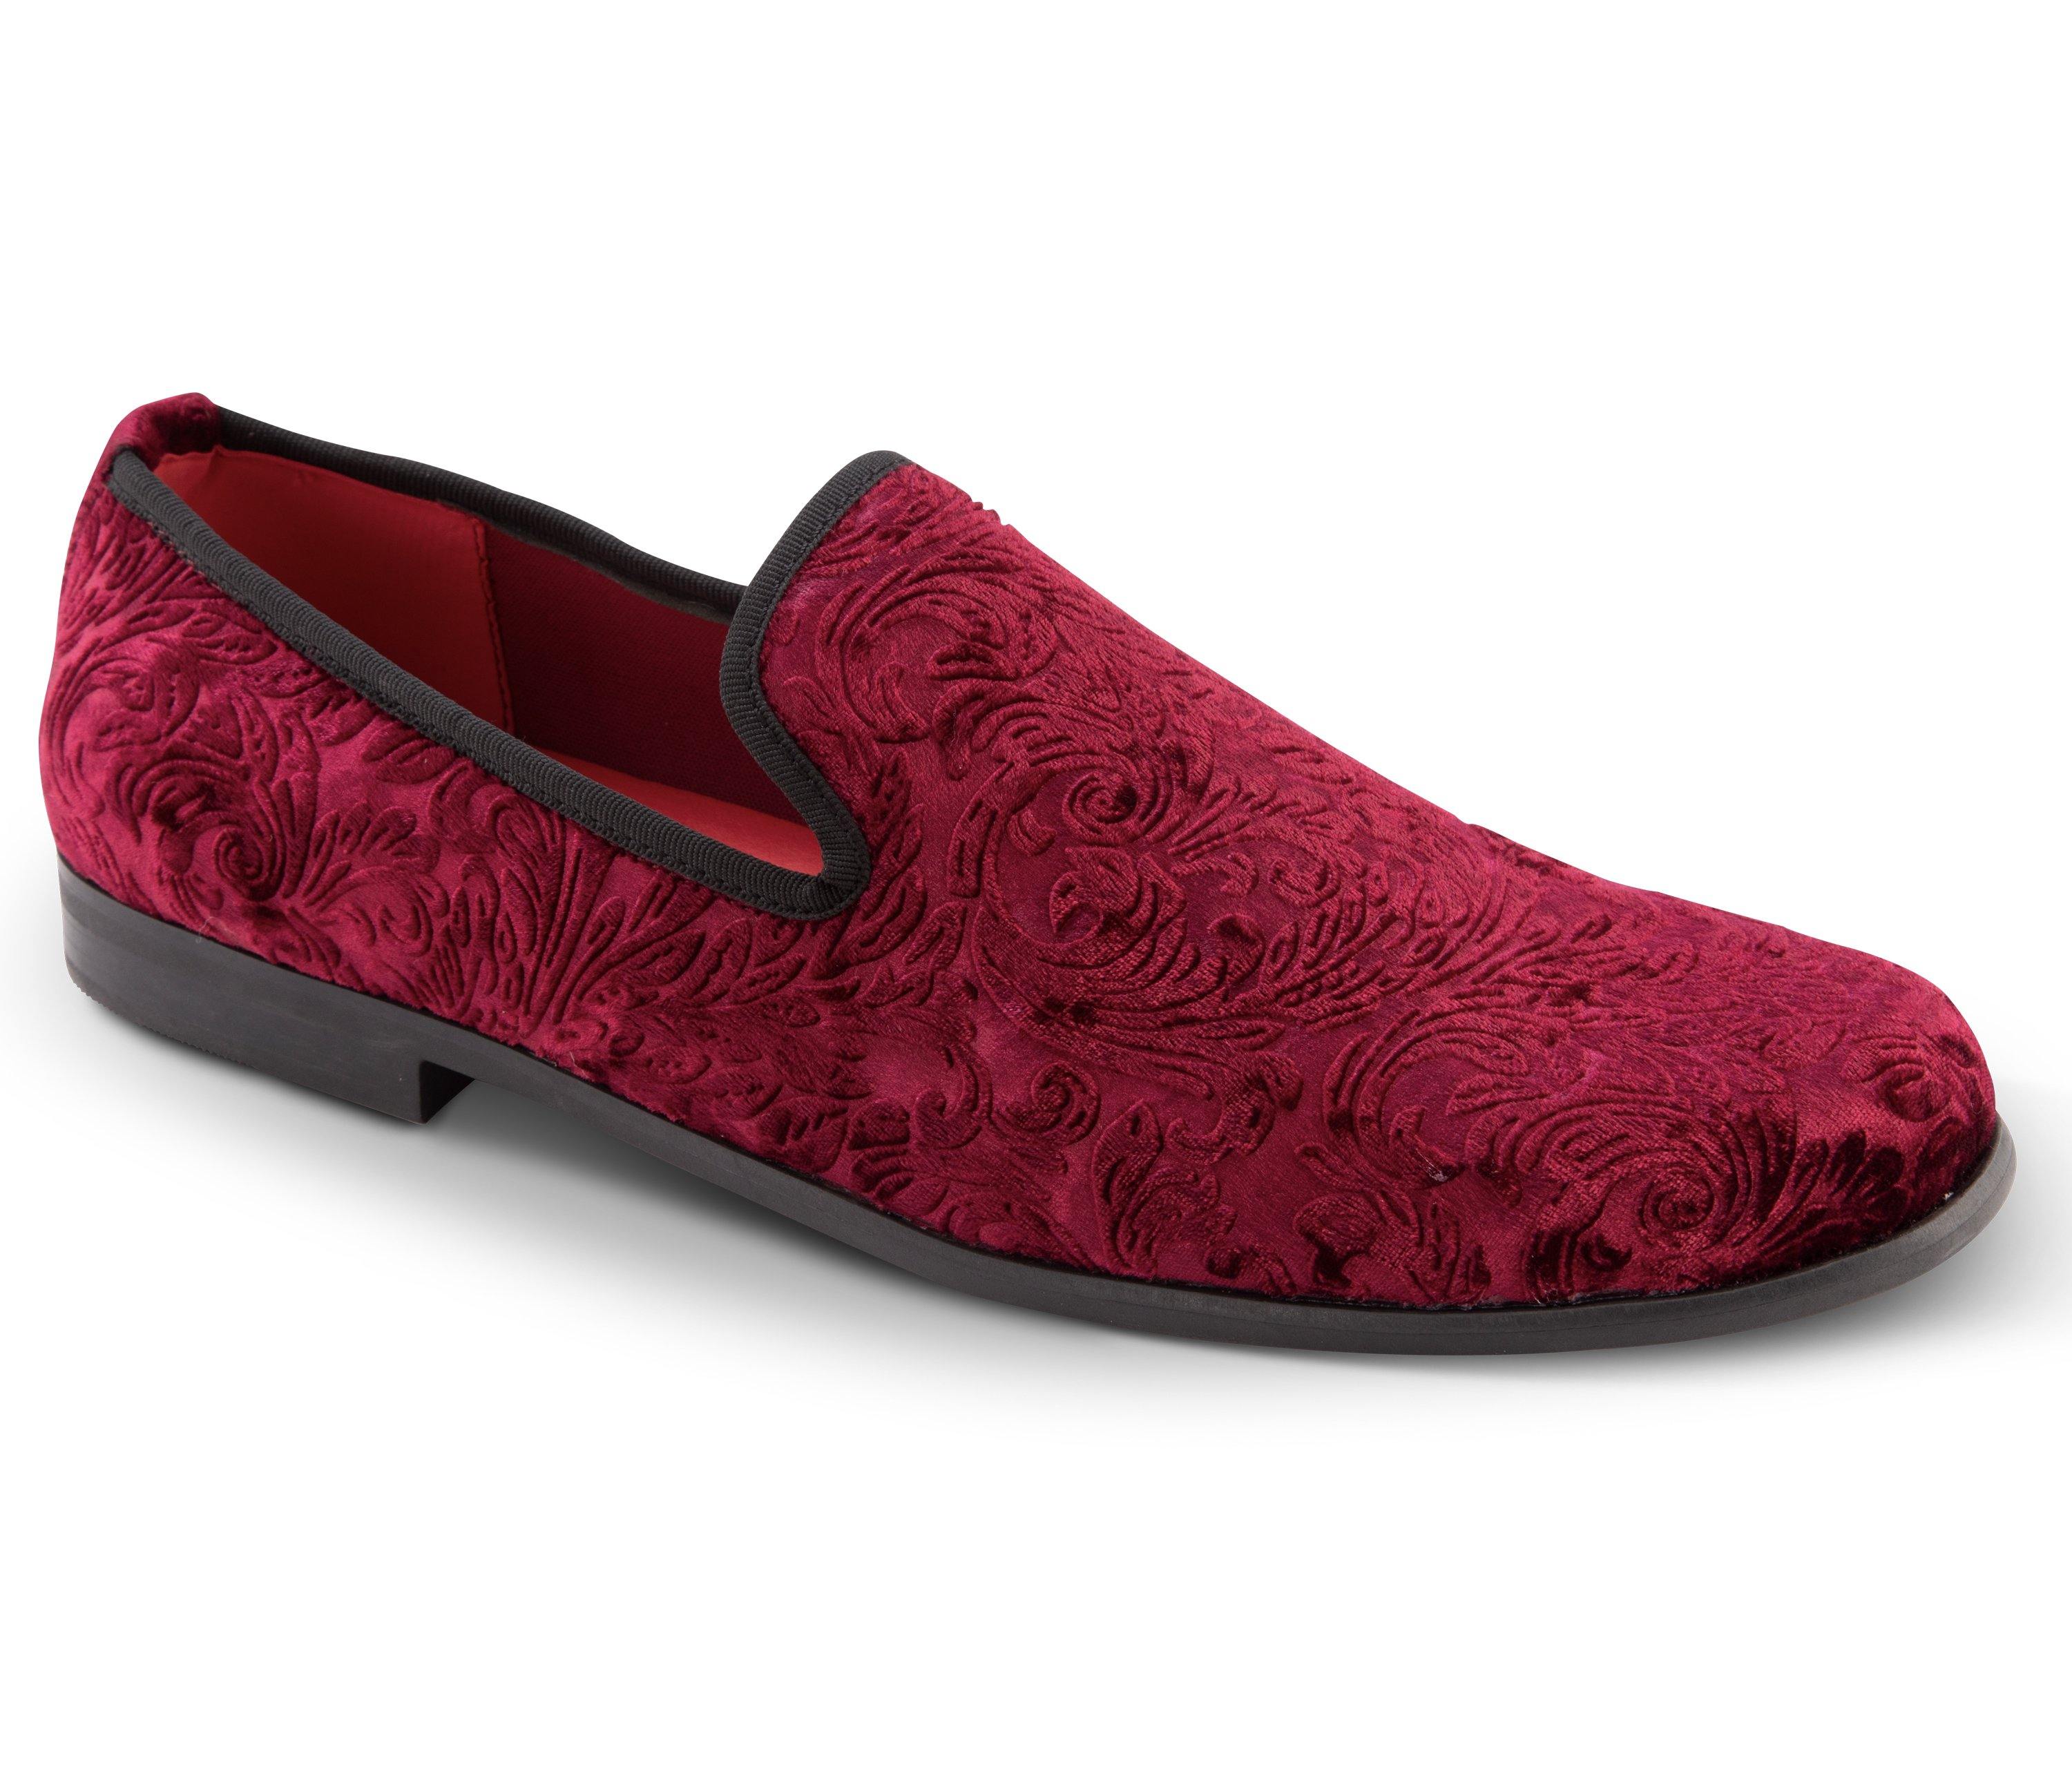 Men's Fashion Loafers Slip-On Shoes Paisley Design in Wine - S83 - Suits & More